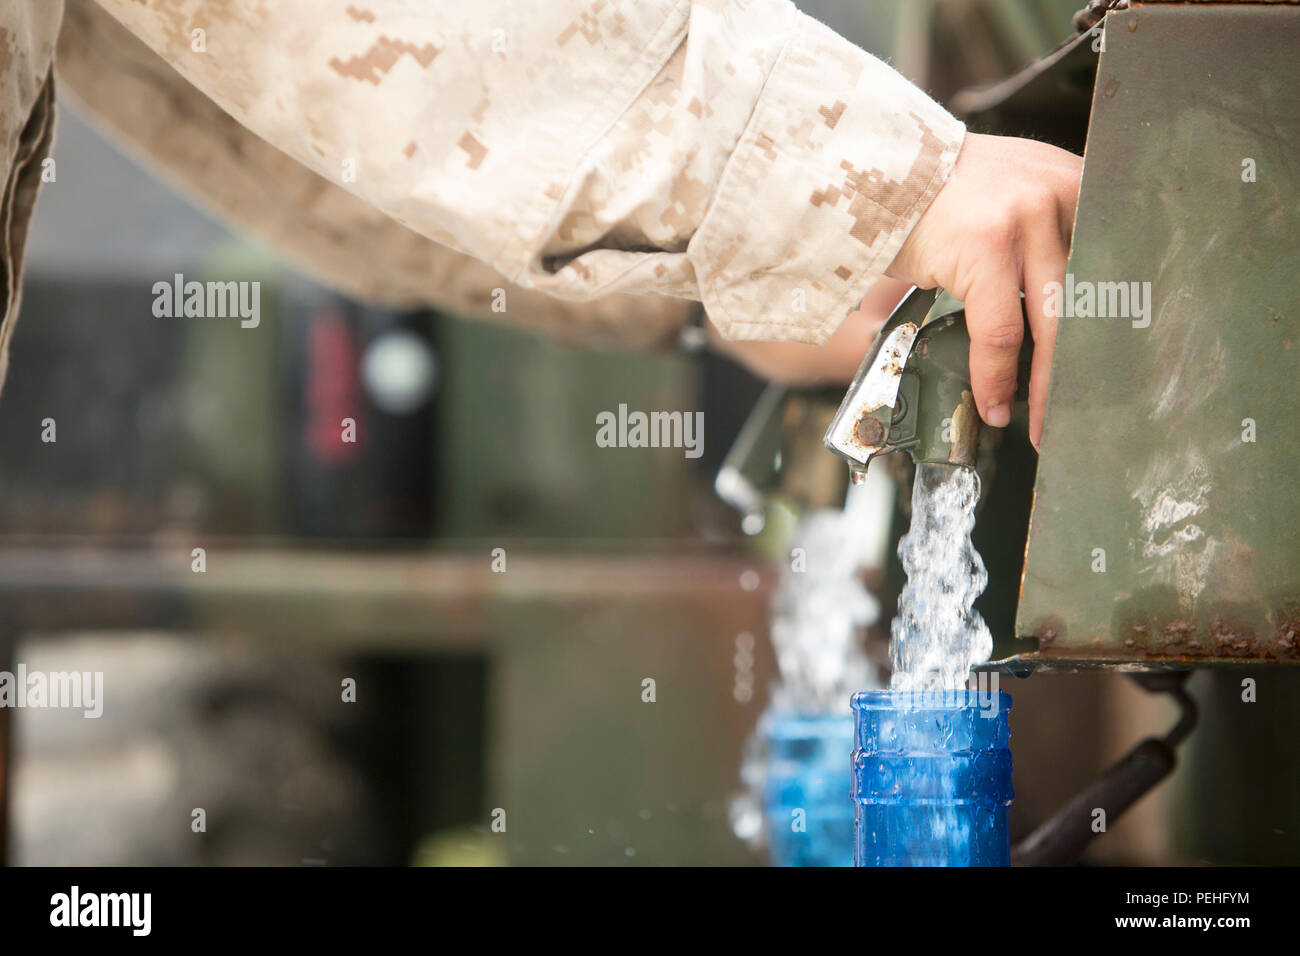 A U.S. Marine with Combat Logistics Battalion 31, 31st Marine Expeditionary Unit, fills water jugs for civilians during typhoon relief efforts in Saipan, Aug. 14, 2015.  The Marines with Echo Company, Battalion Landing Team 2nd Battalion, 5th Marines, 31st MEU and CLB 31, 31st MEU, assisted the locals of Saipan by producing and distributing potable water. The Marines and sailors of the 31st MEU were conducting training near the Mariana Islands when they were redirected to Saipan after the island was struck by Typhoon Soudelor Aug. 2-3. (U.S. Marine Corps photo by Lance Cpl. Brian Bekkala/Relea Stock Photo